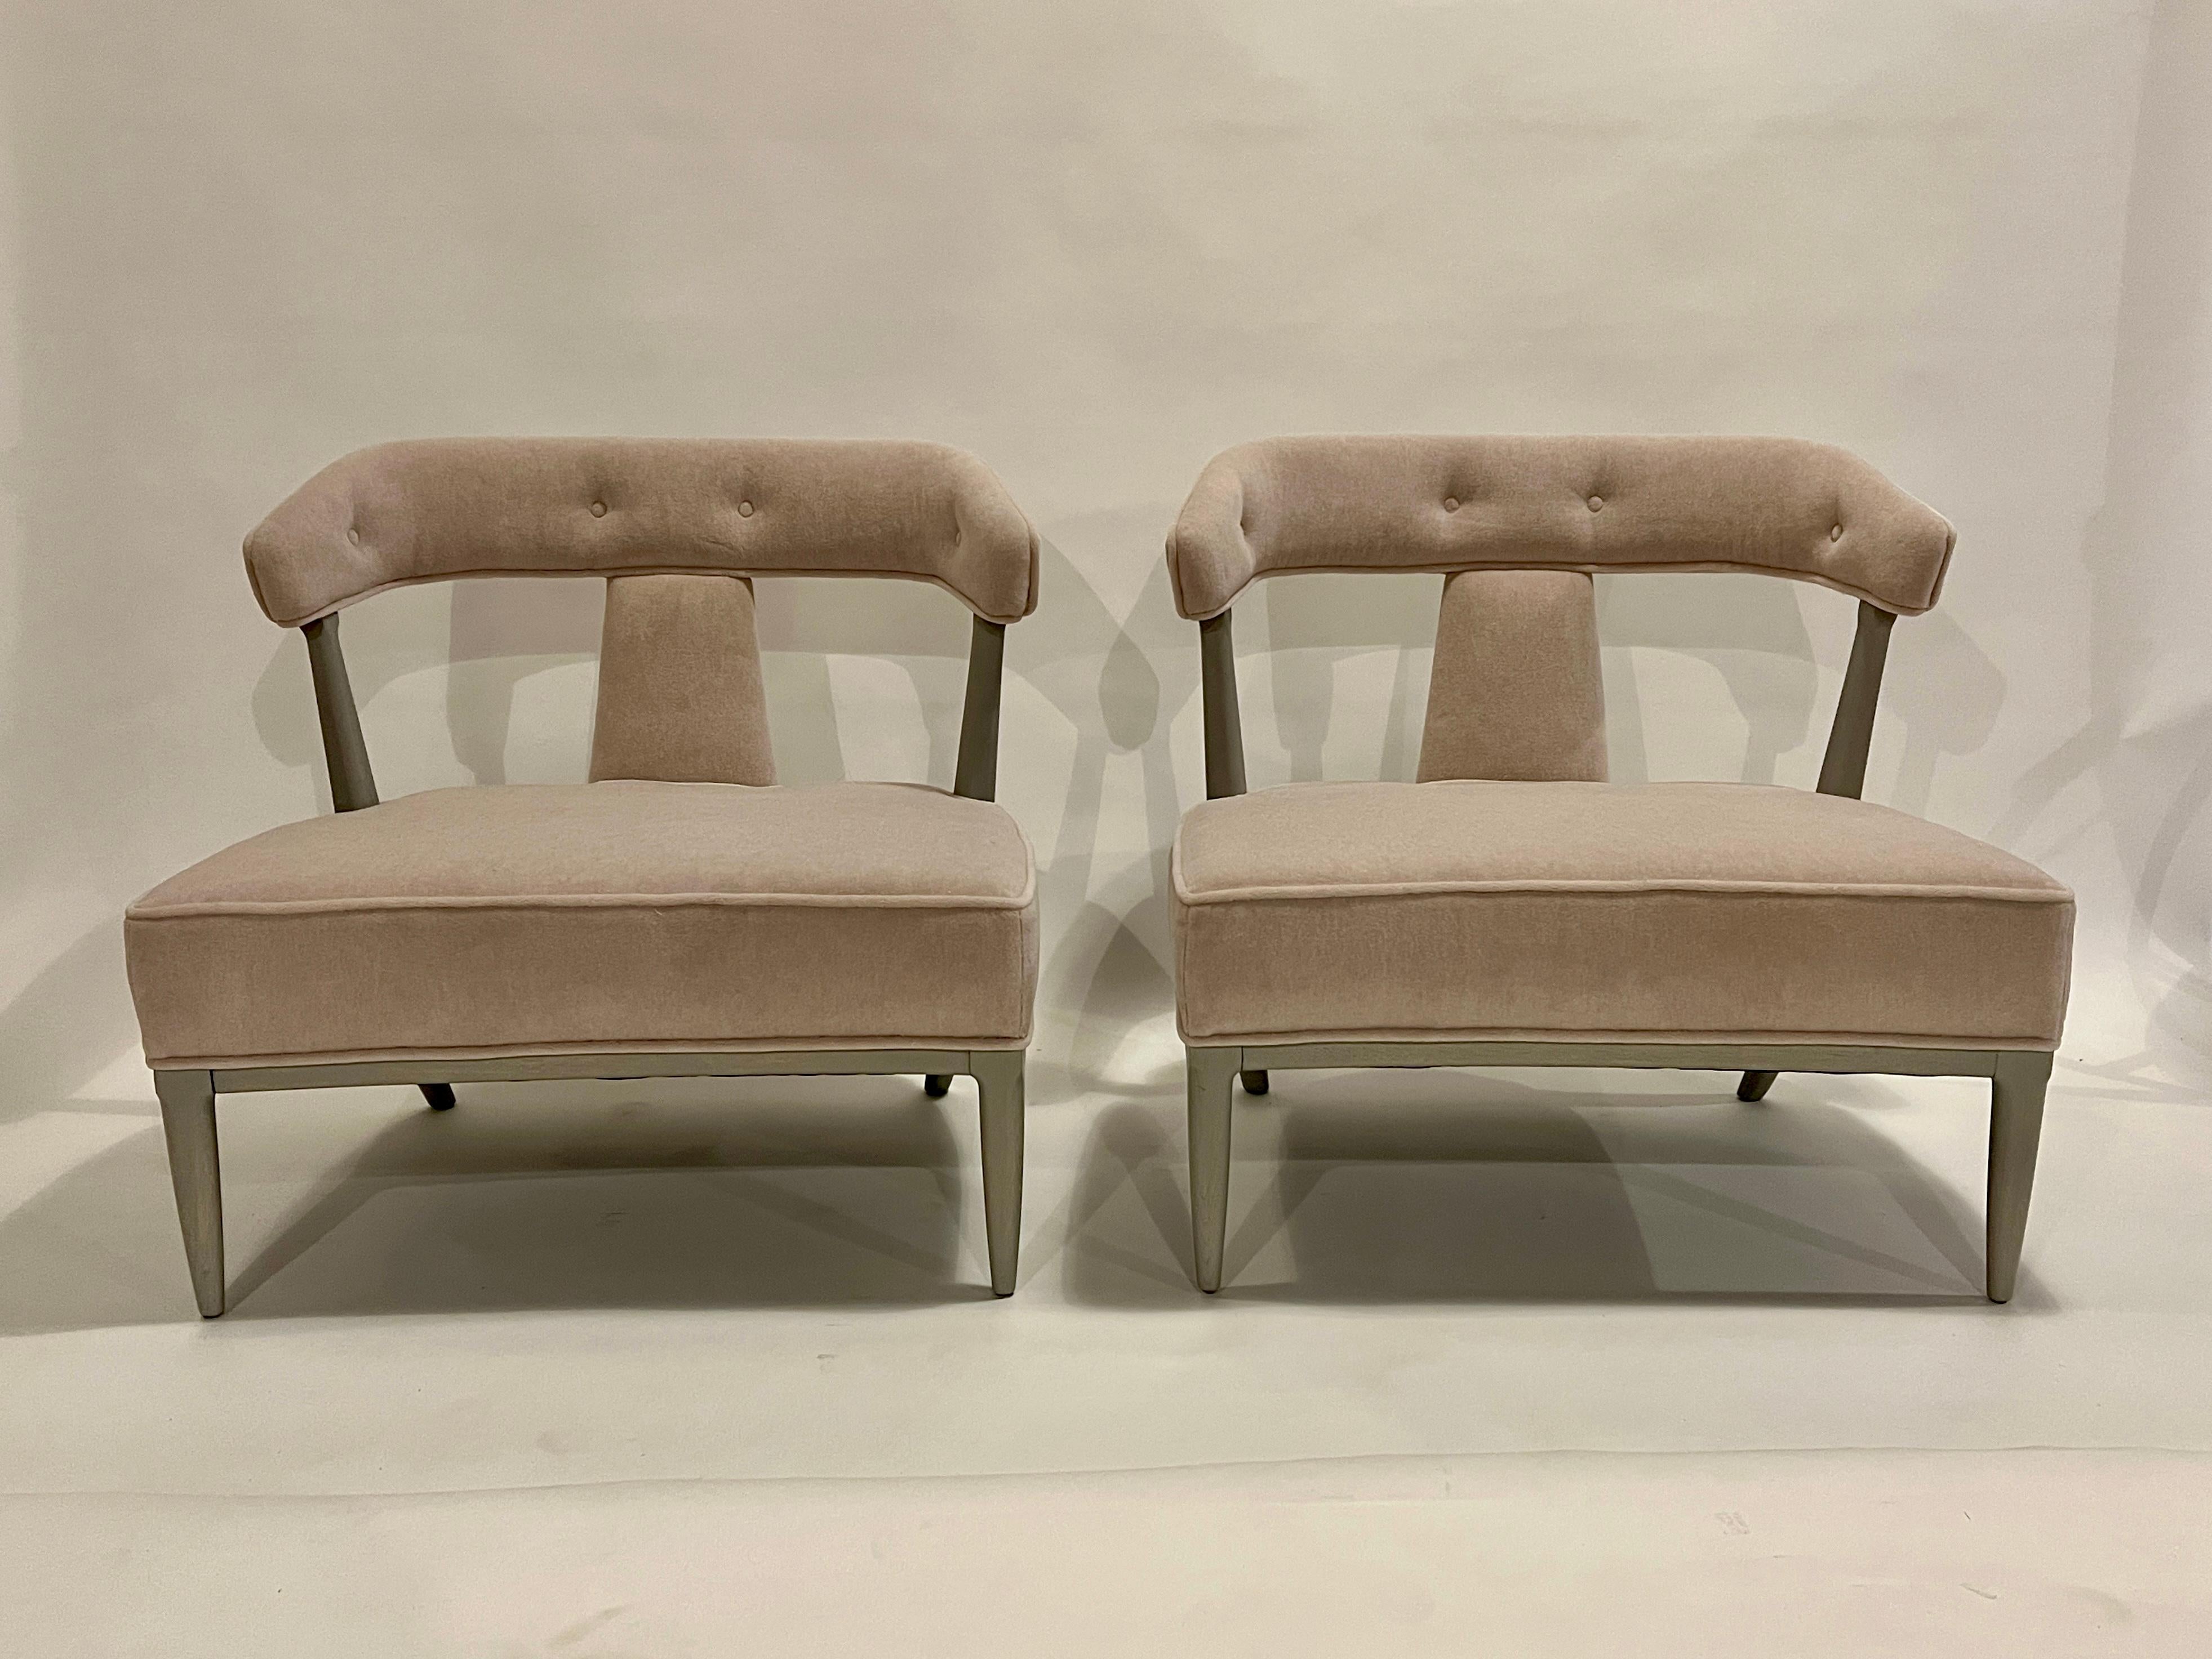 Rare pair of Hollywood Regency easy chairs designed by John Lubberts and Lamert Mulder for Tomlinson's 